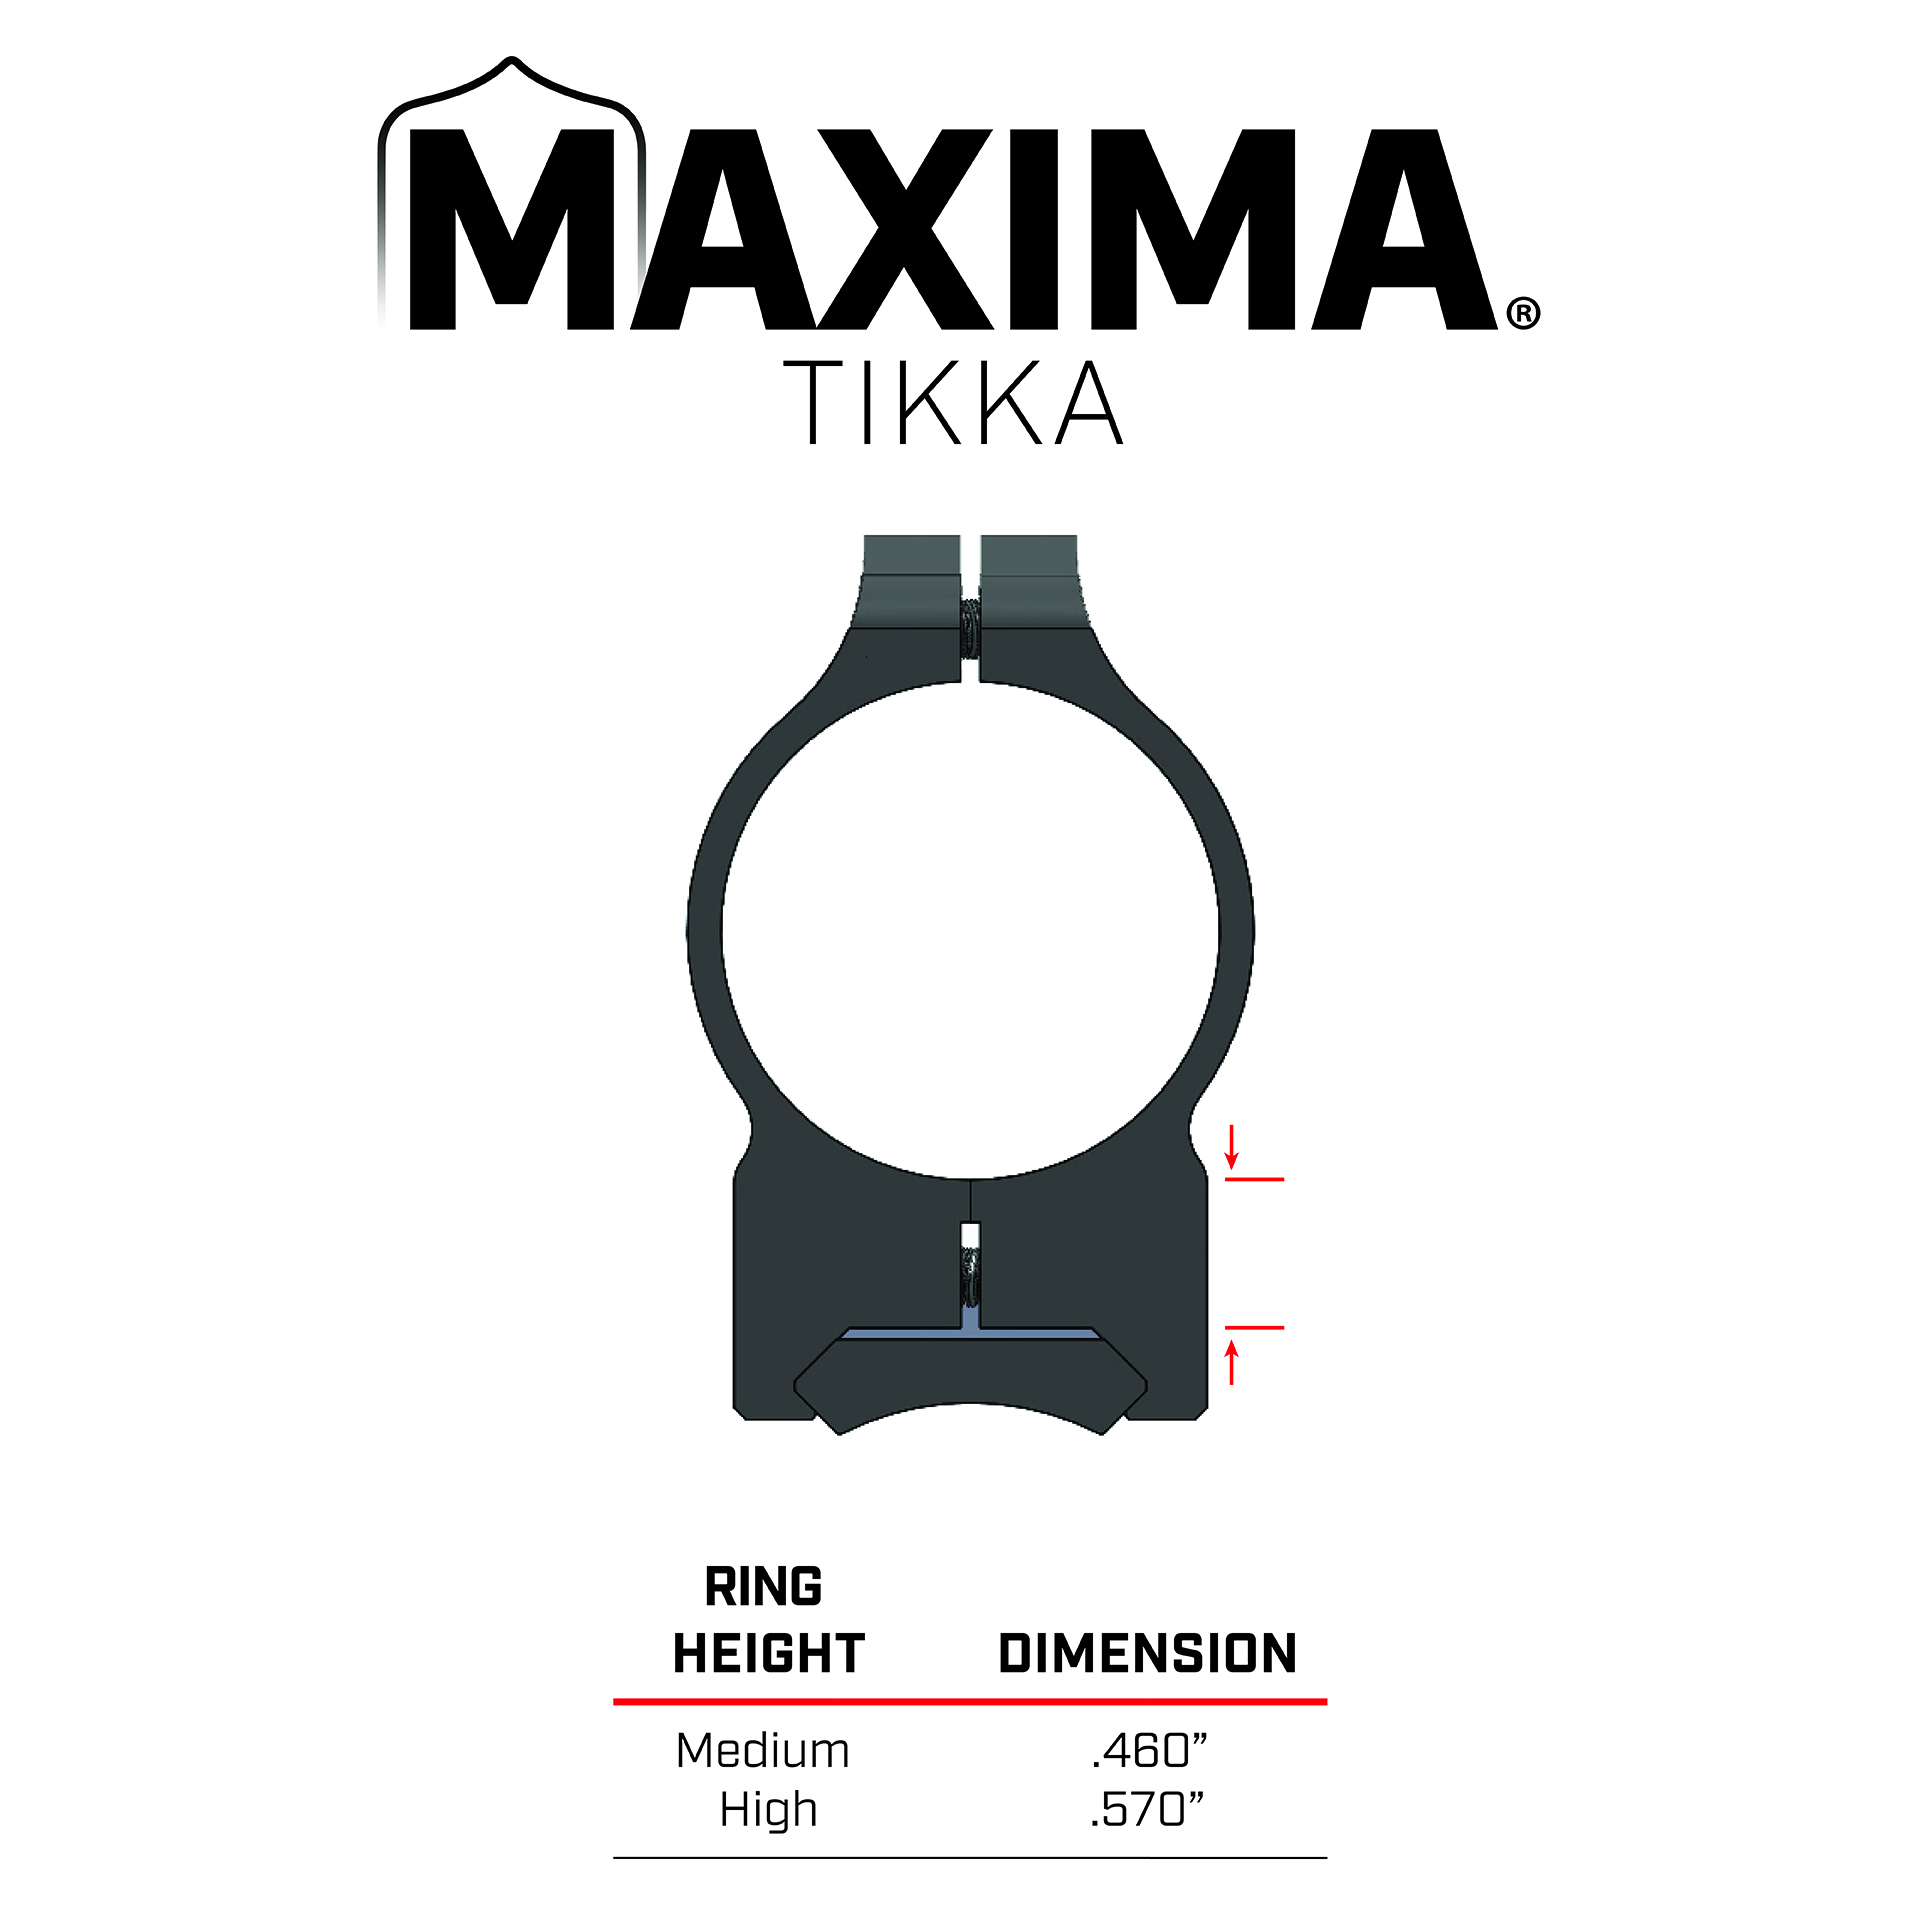 maxima scope ring height for tikka. med .460 inch, high, .570 inch